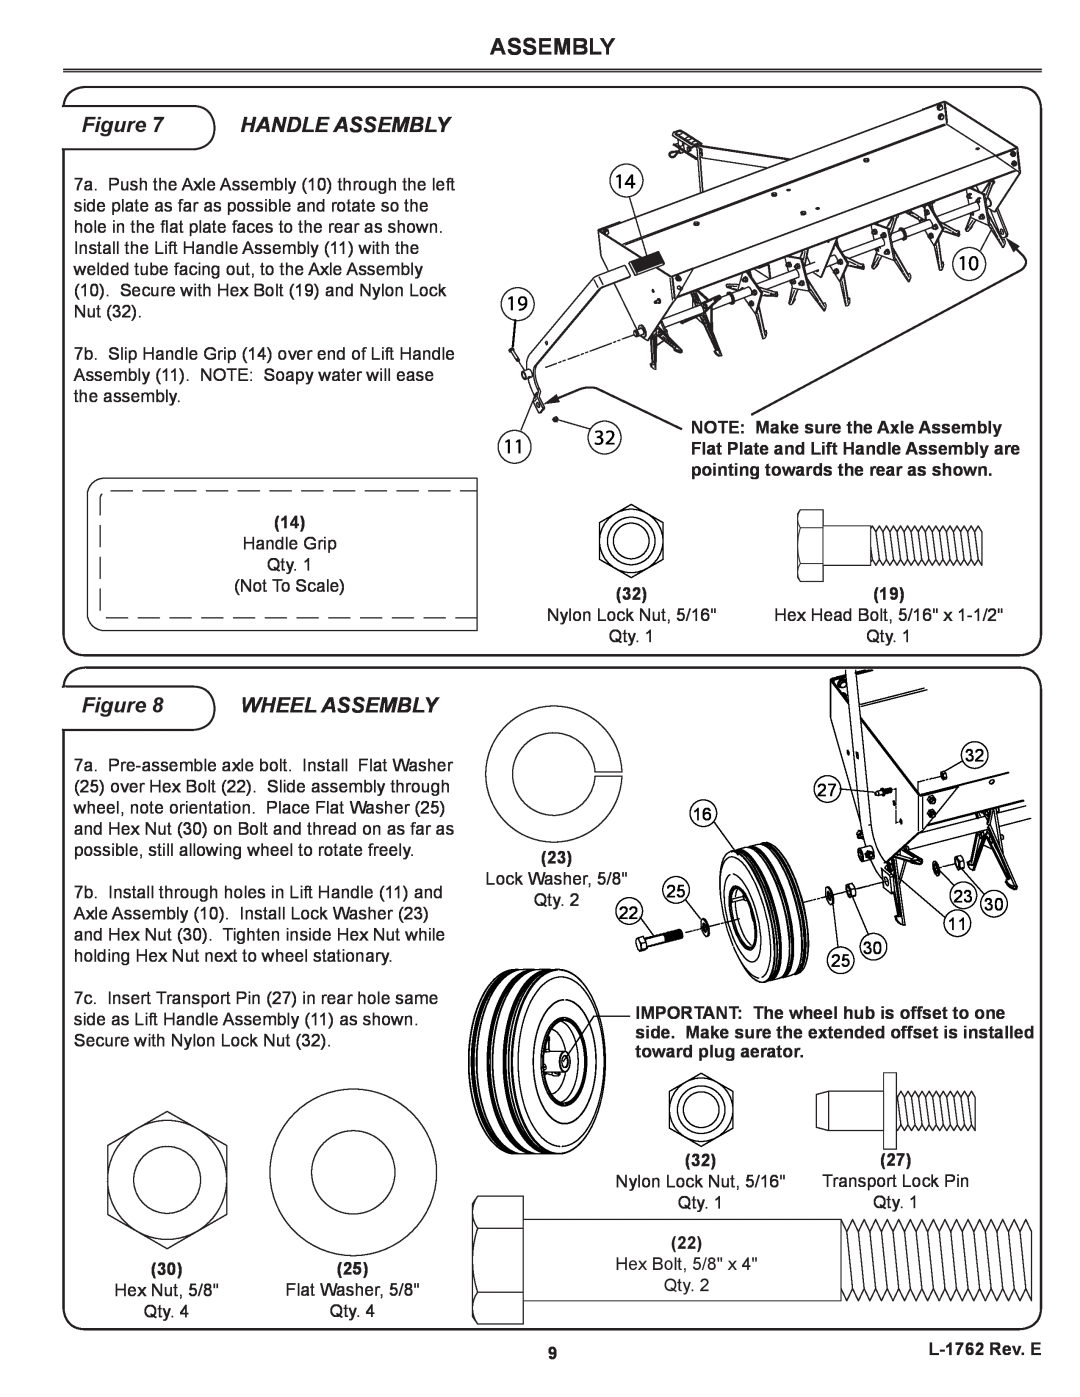 Brinly-Hardy PA-40 BH, PA-48 BH owner manual Handle Assembly, Wheel Assembly, 32 27 23 11 25, Figure 